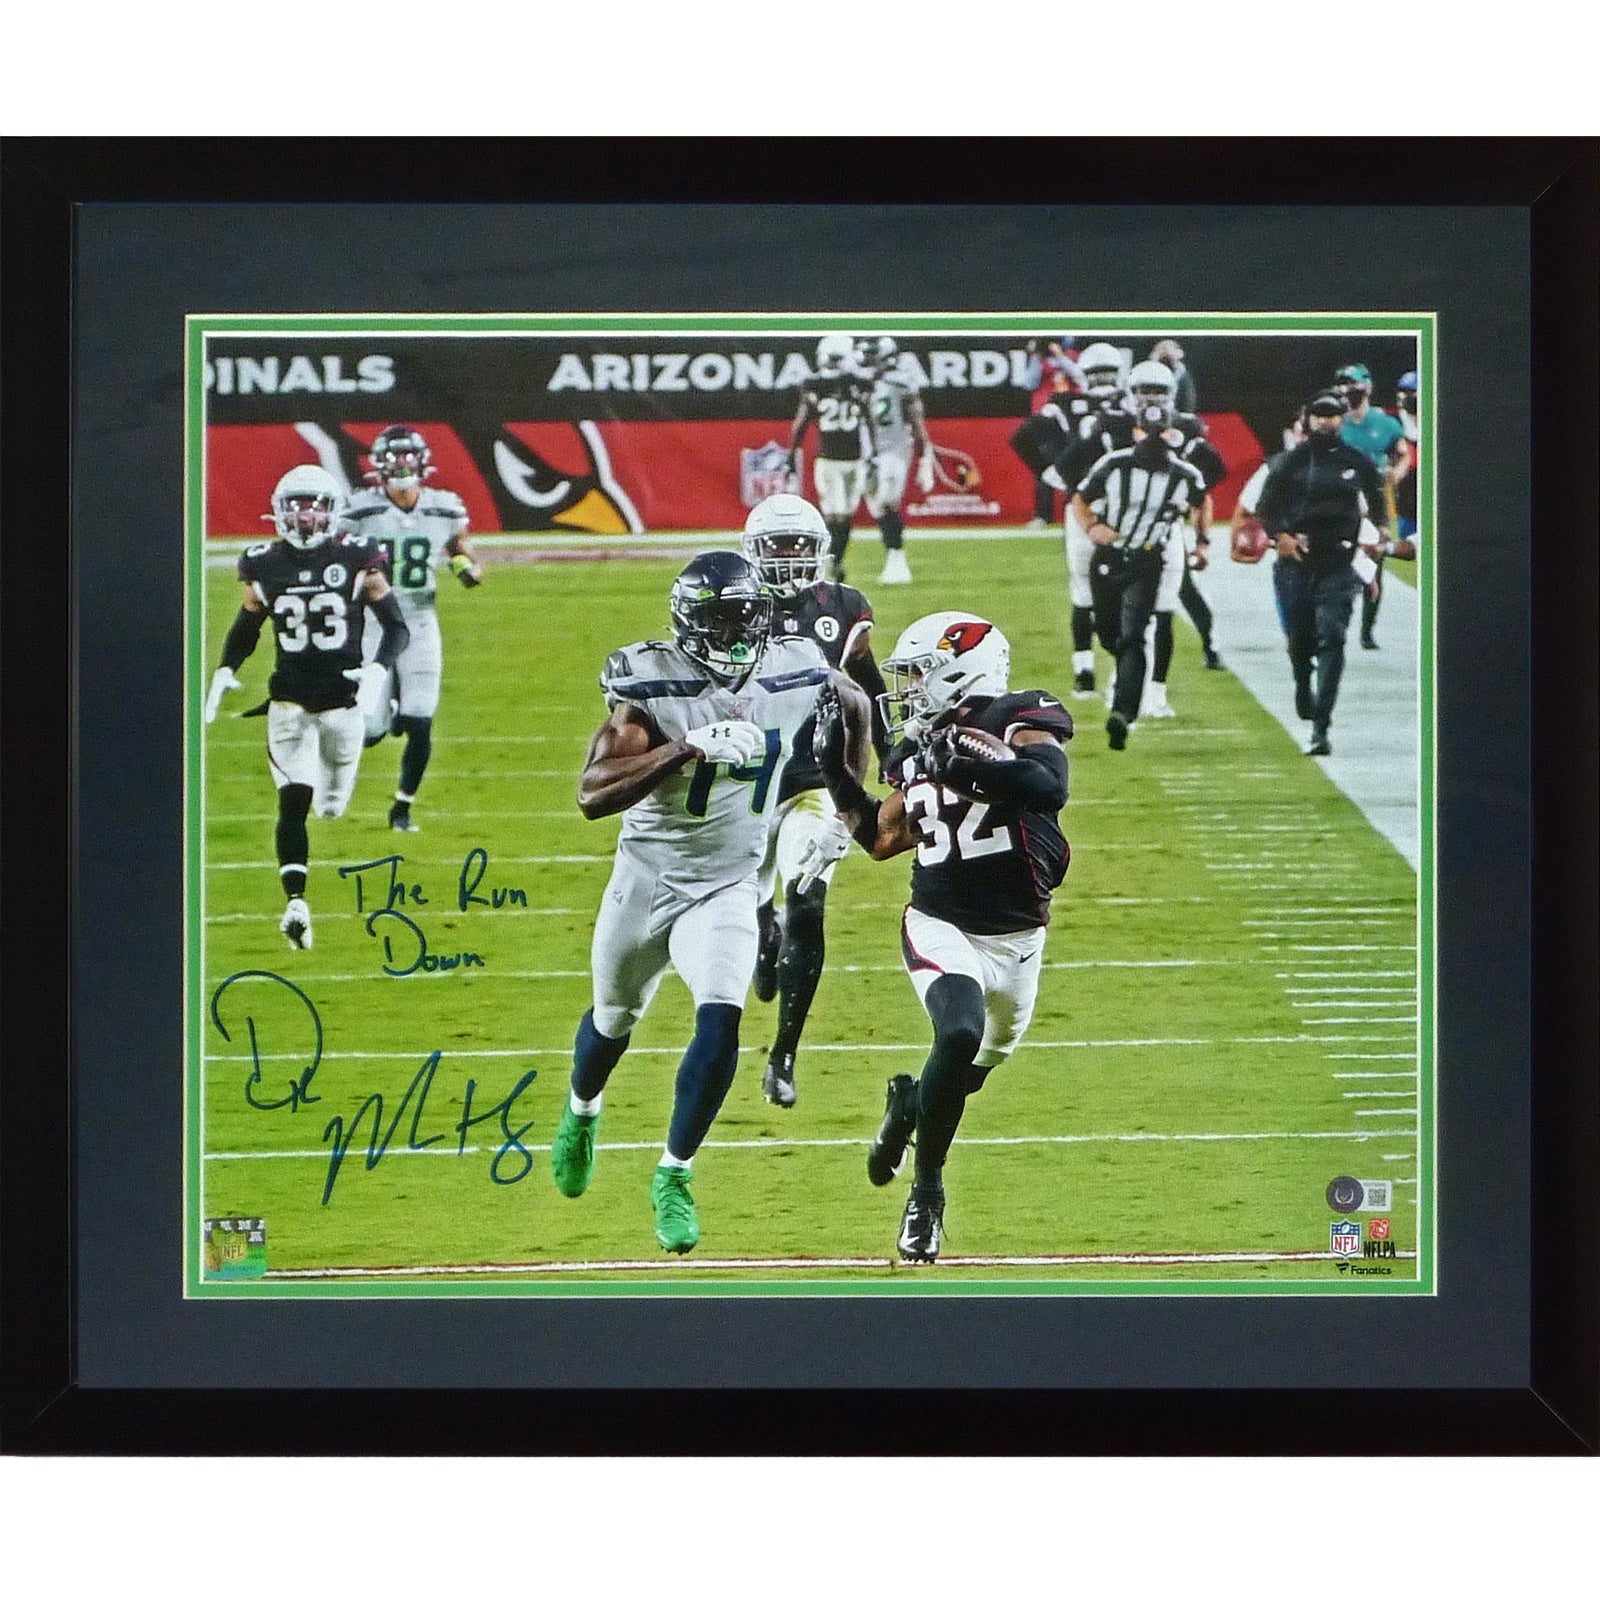 DK Metcalf Autographed Seattle Seahawks Deluxe Framed 16x20 Photo w/ 